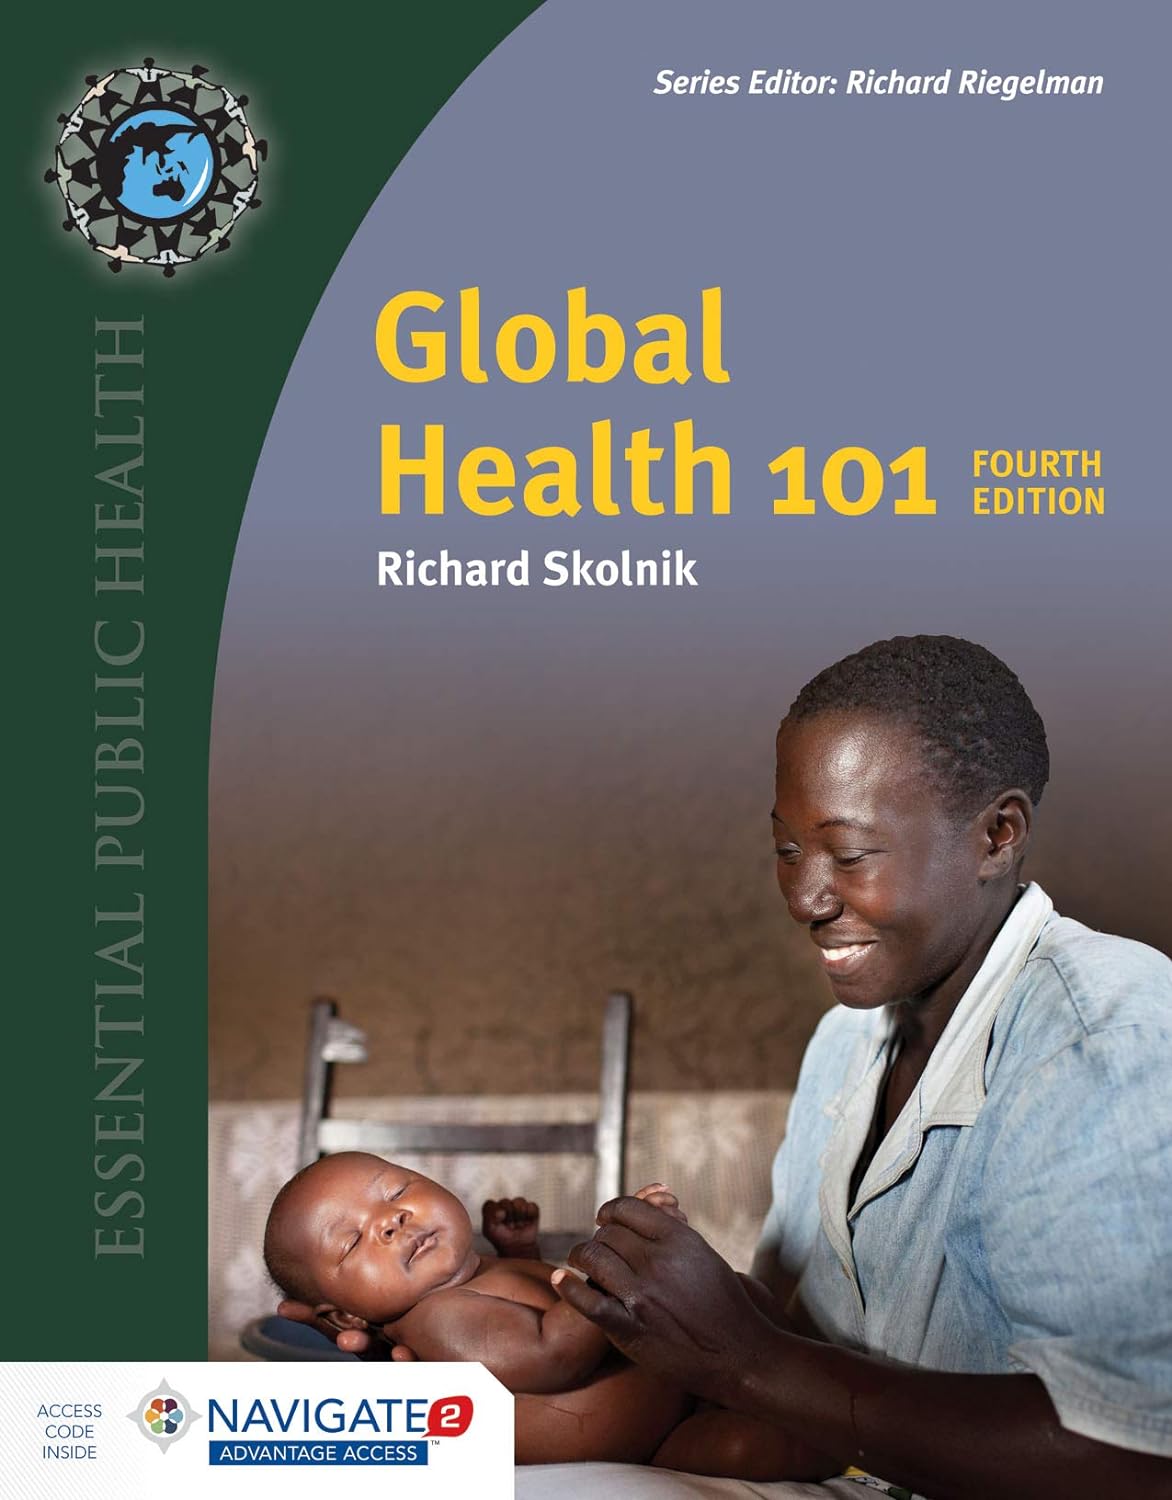 test bank questions to accompany "Global Health 101"